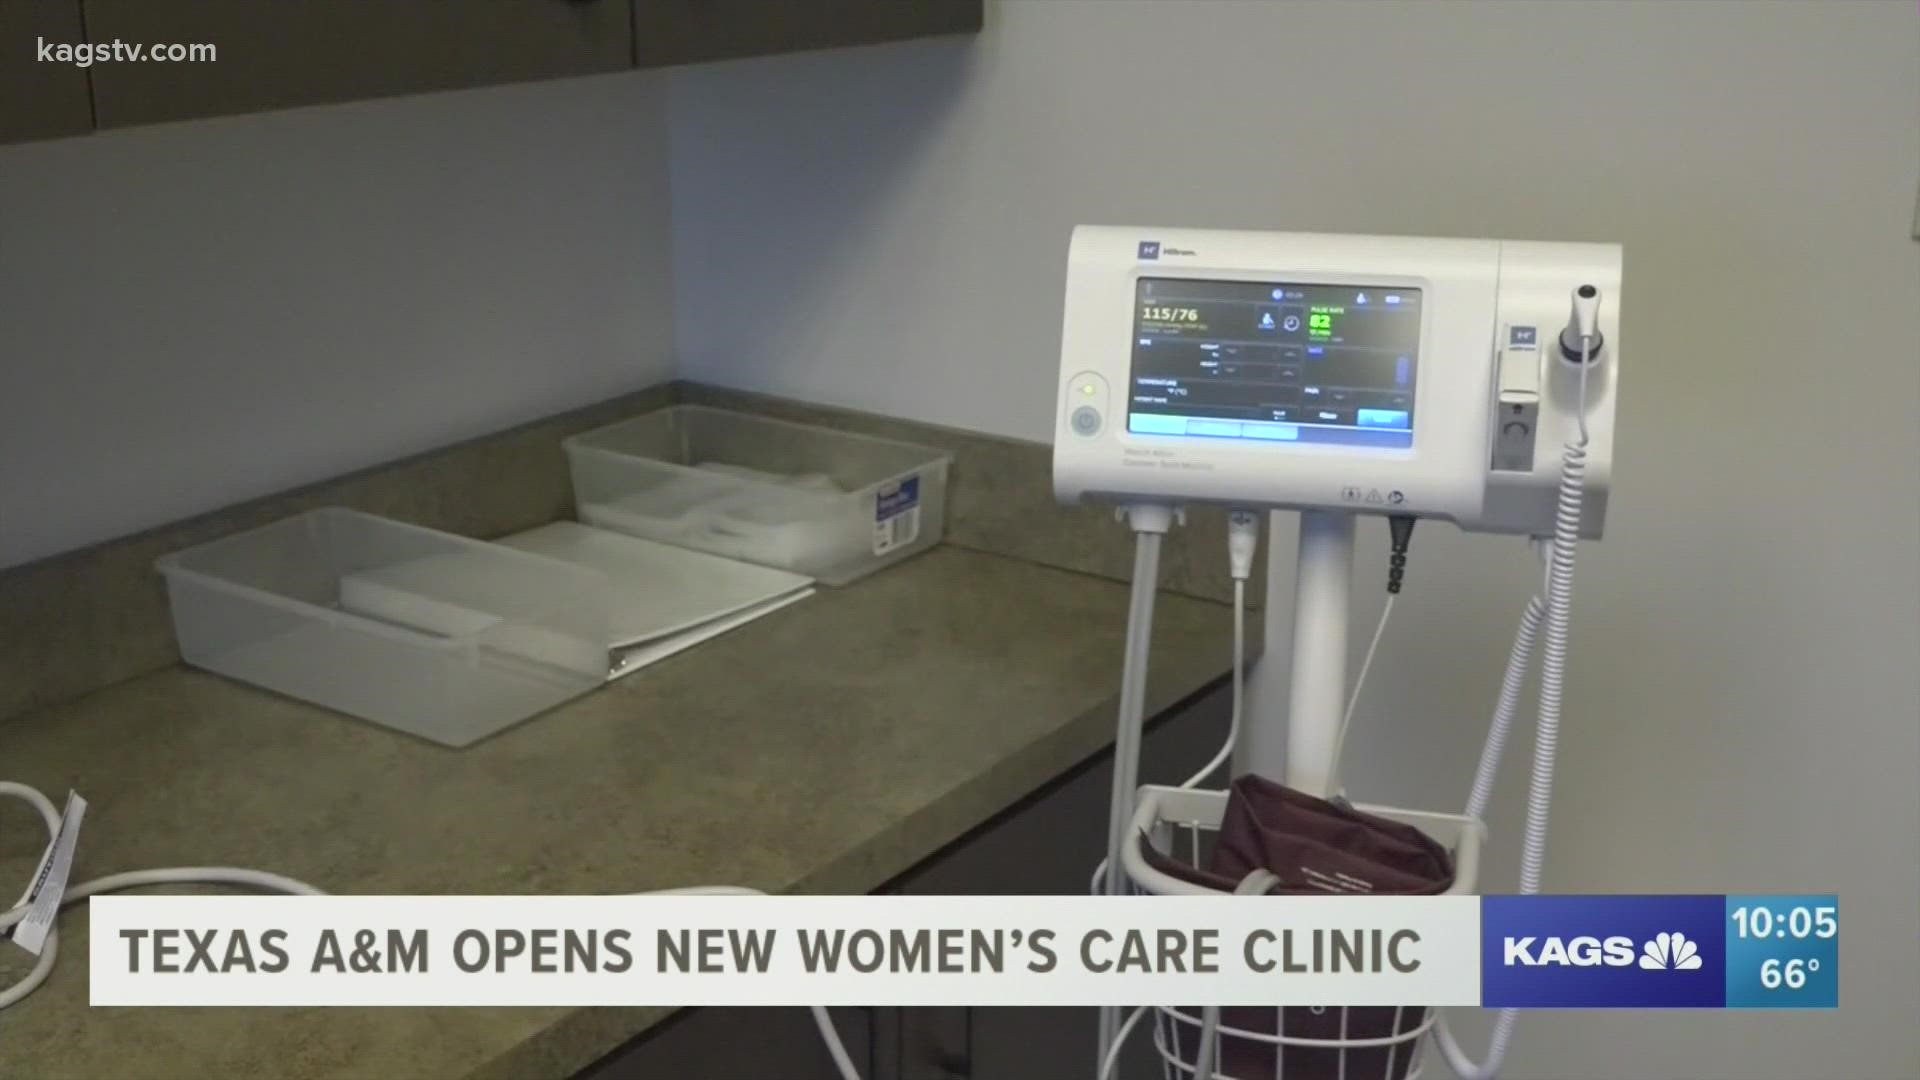 The clinic is geared exclusively towards women's health.